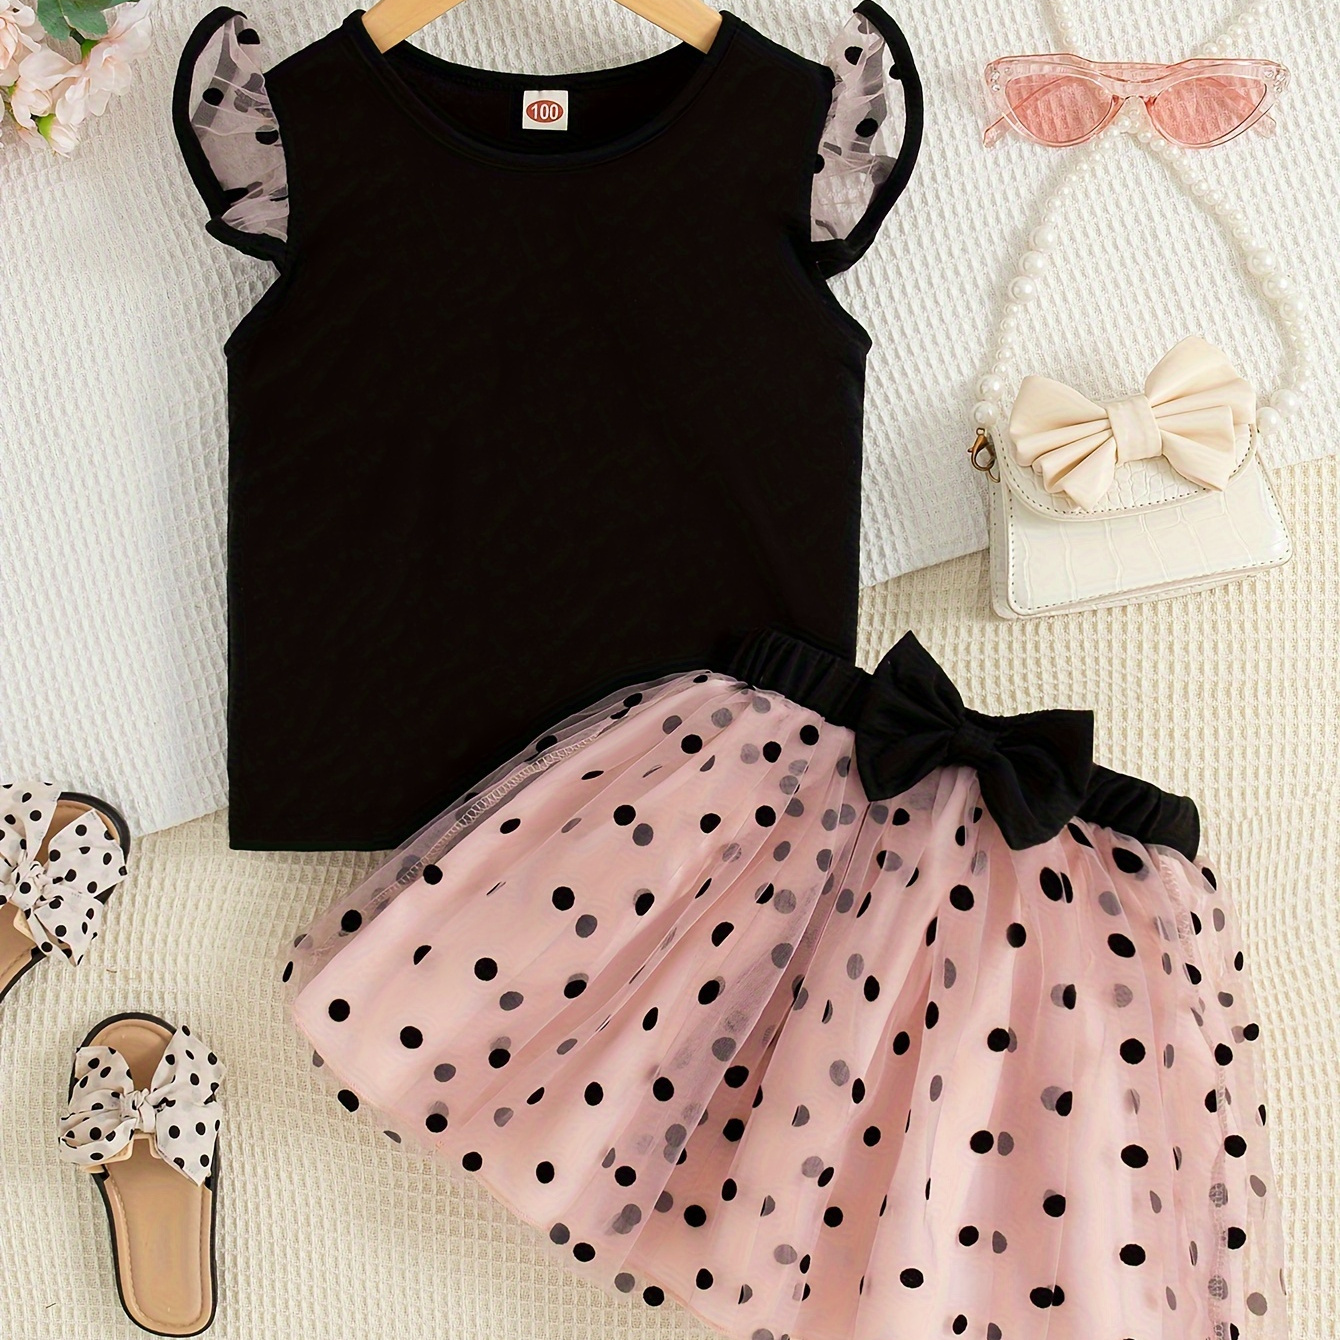 

Sweet Polka Dots Two-piece Set, Girls Casual Lace Sleeve T-shirt + Mesh Dots Tutu Skirt Vacation Summer Outfit